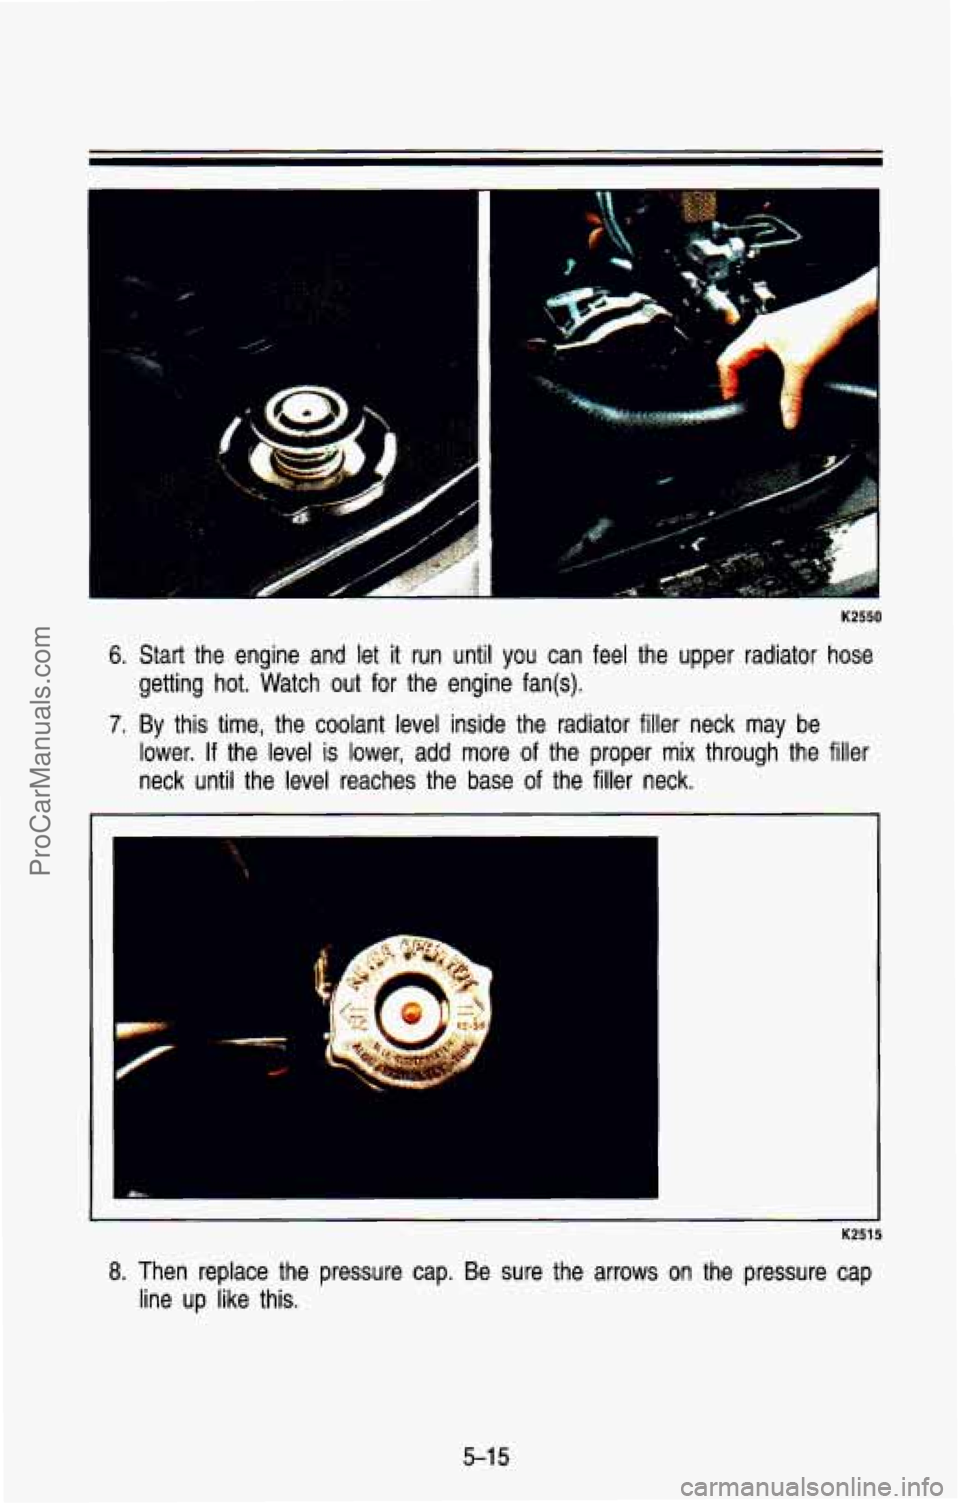 CHEVROLET SUBURBAN 1993  Owners Manual K2550 
6. Start  the  engine and let it run  until  you  can  feel  the  upper  radiator  hose 
getting  hot.  Watch  out  for  the engine  fan@). 
7. By this  time,  the  coolant  level  inside  the 